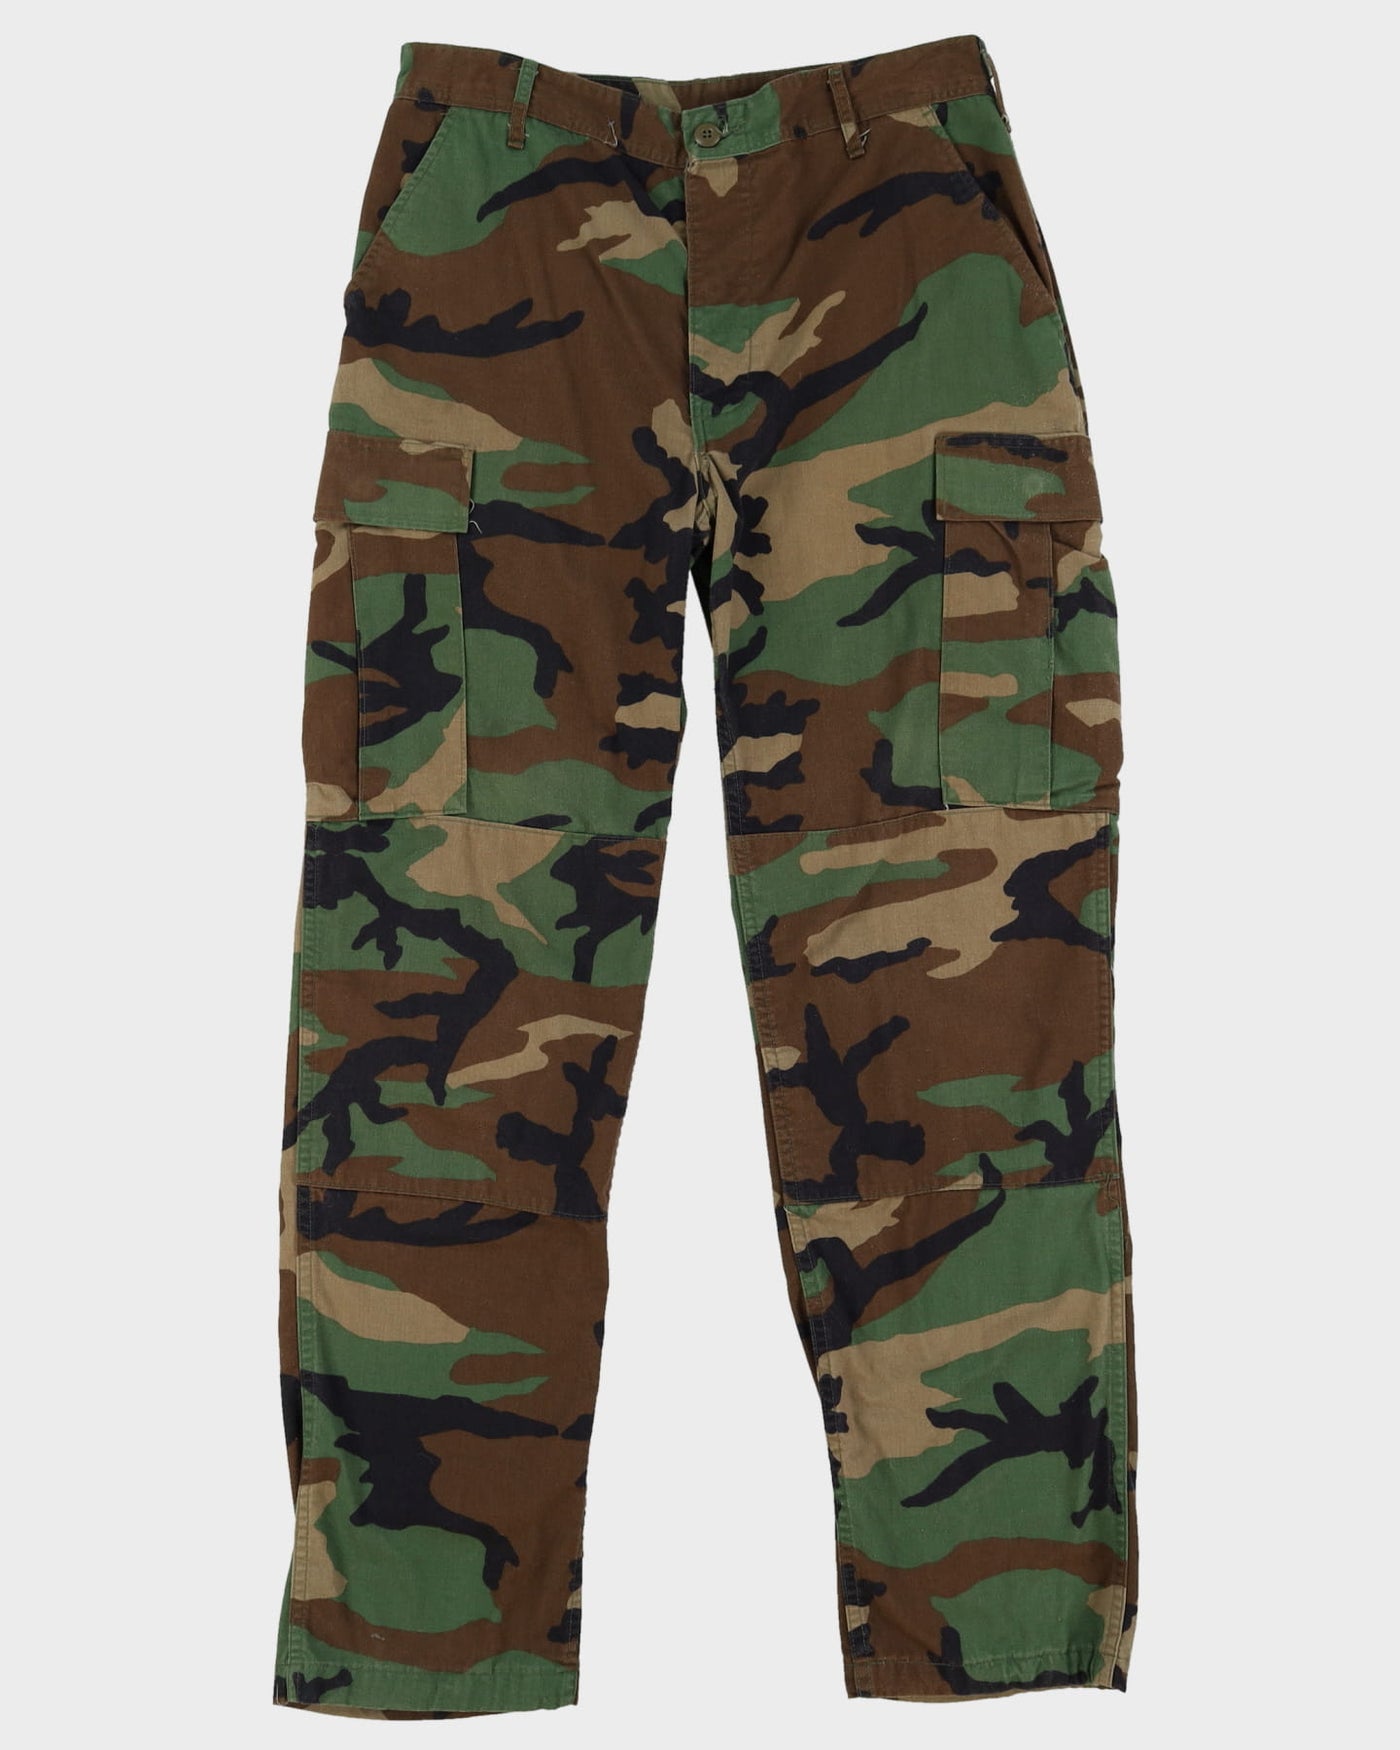 1990s US Army Woodland BDU Combat Trousers - 32x31